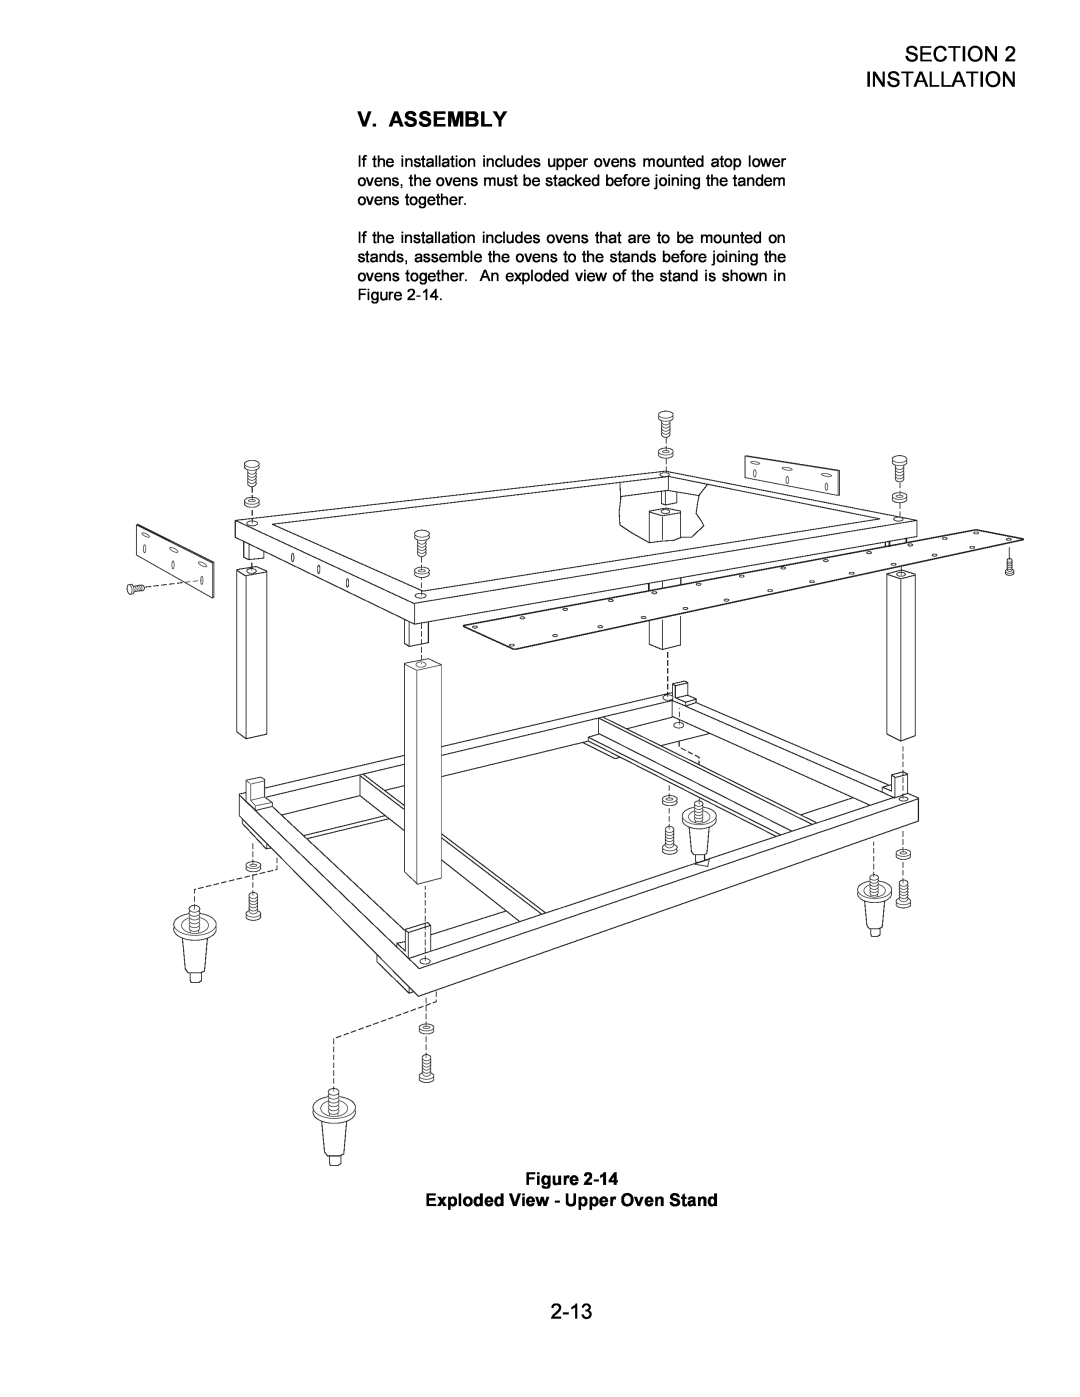 Middleby Marshall owner manual V. Assembly, 2-13, Exploded View - Upper Oven Stand, Section Installation 